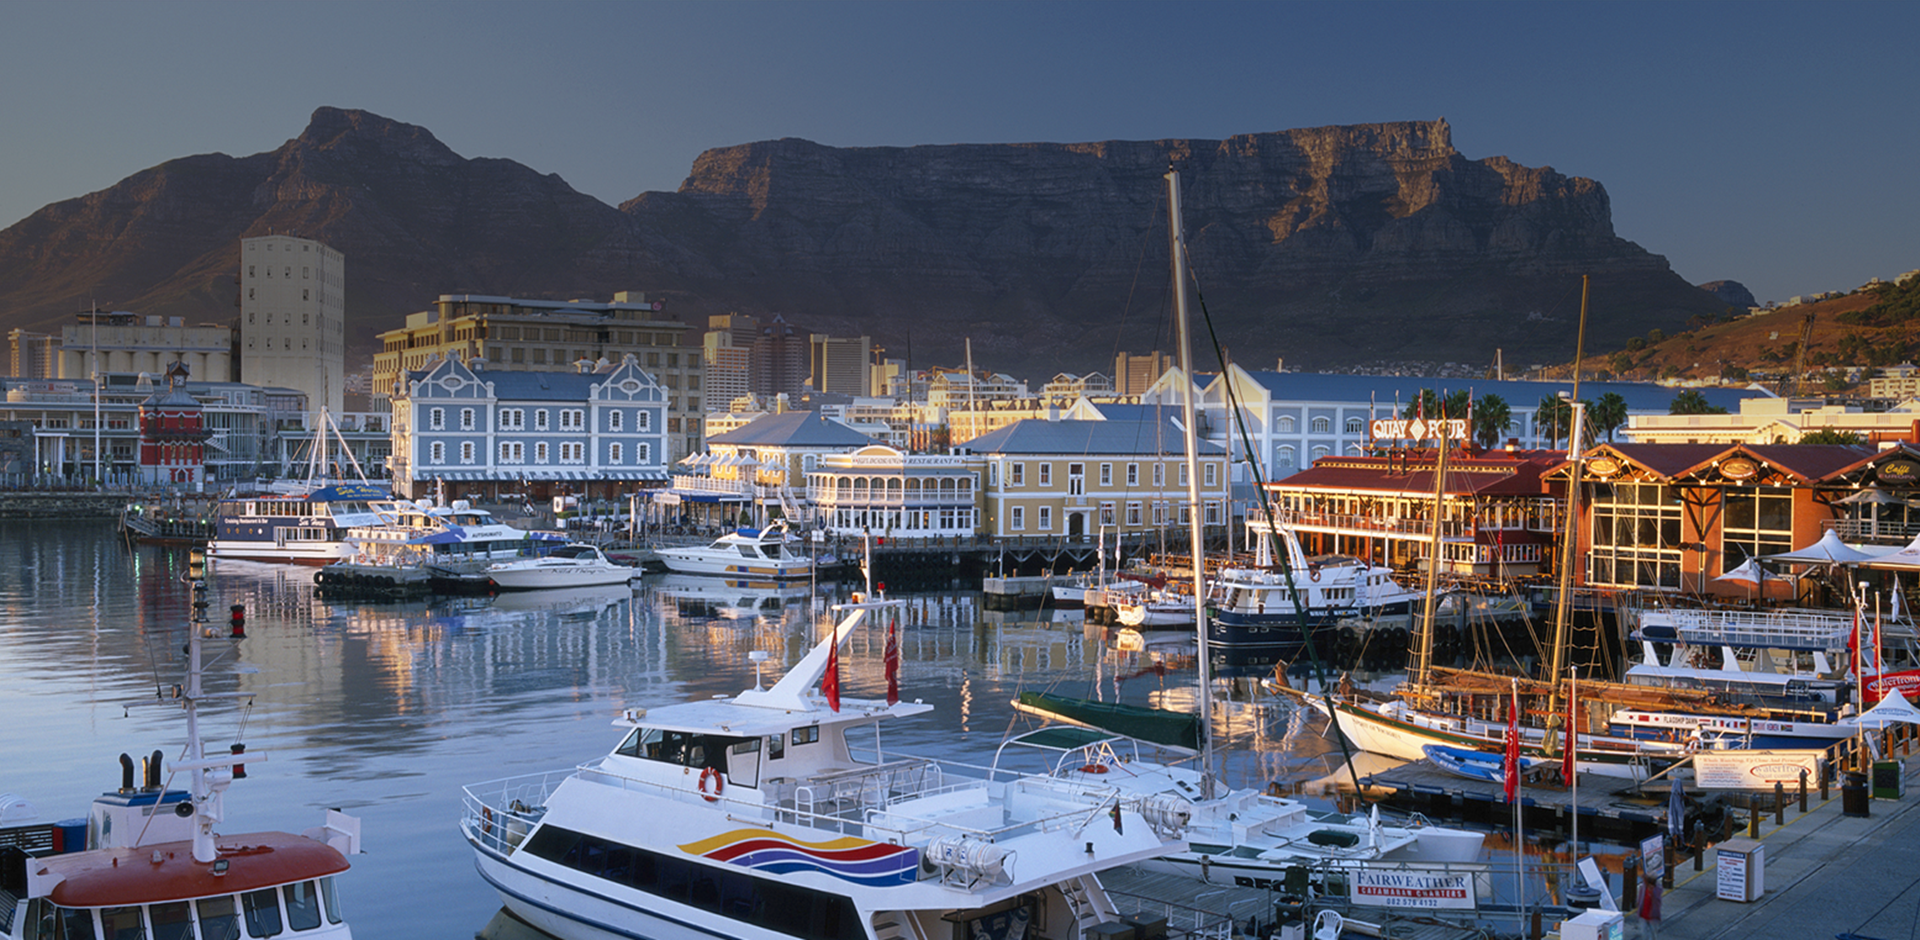 Waterfront town with boats in harbor with Table Mountain in background, South Africa. 